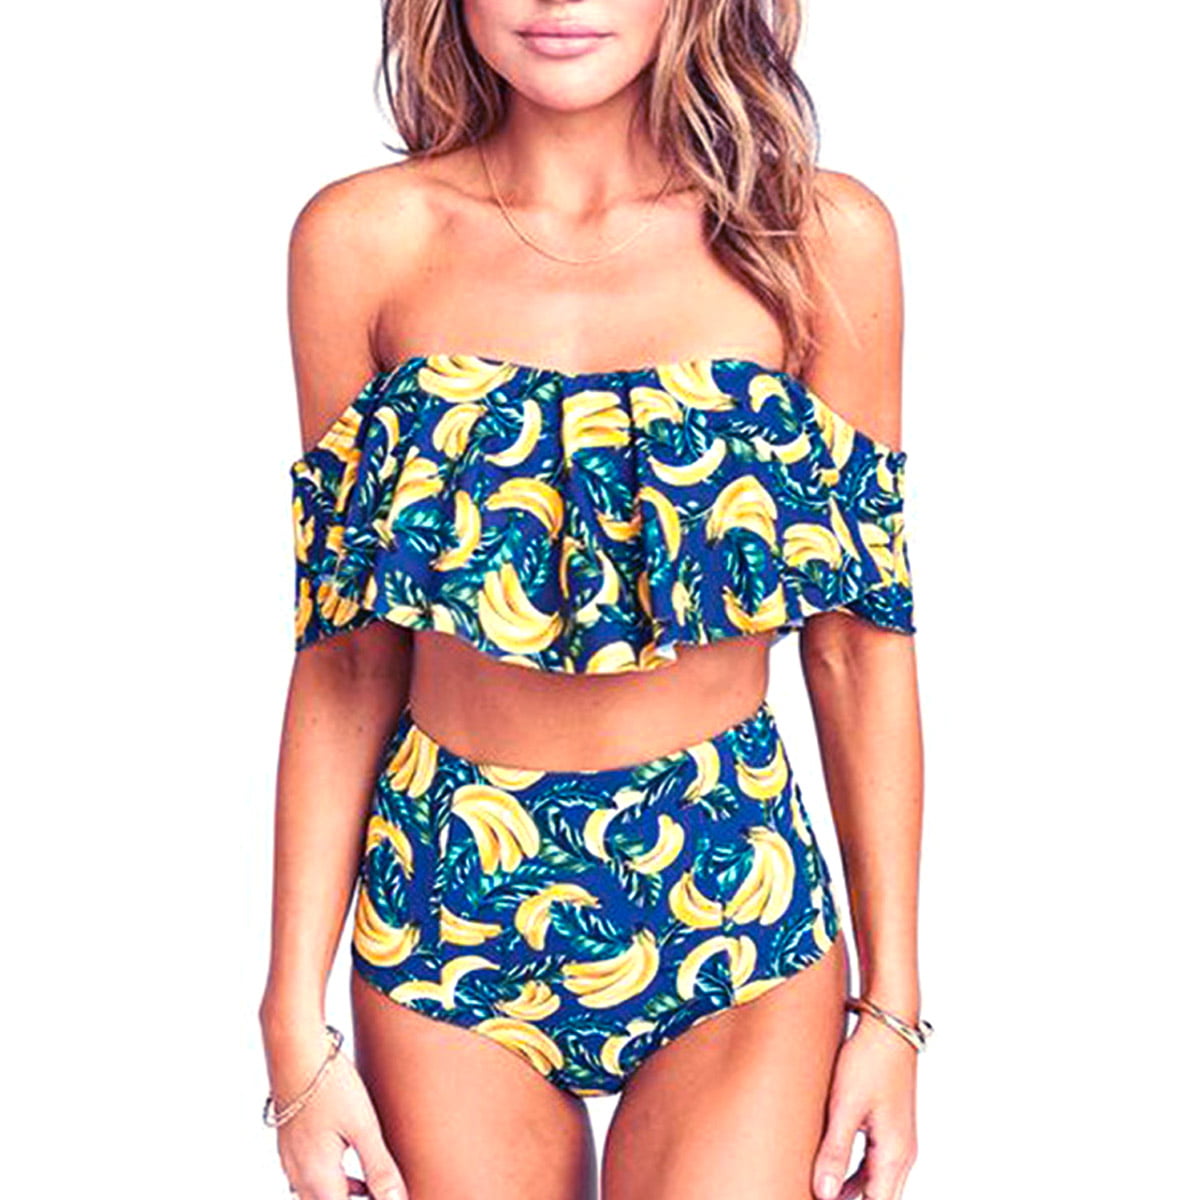 Thenxin Swimsuits for Women Dinosaur Print Two Piece Bathing Suits Flounce Ruffled Top with High Waisted Bottom Tankini